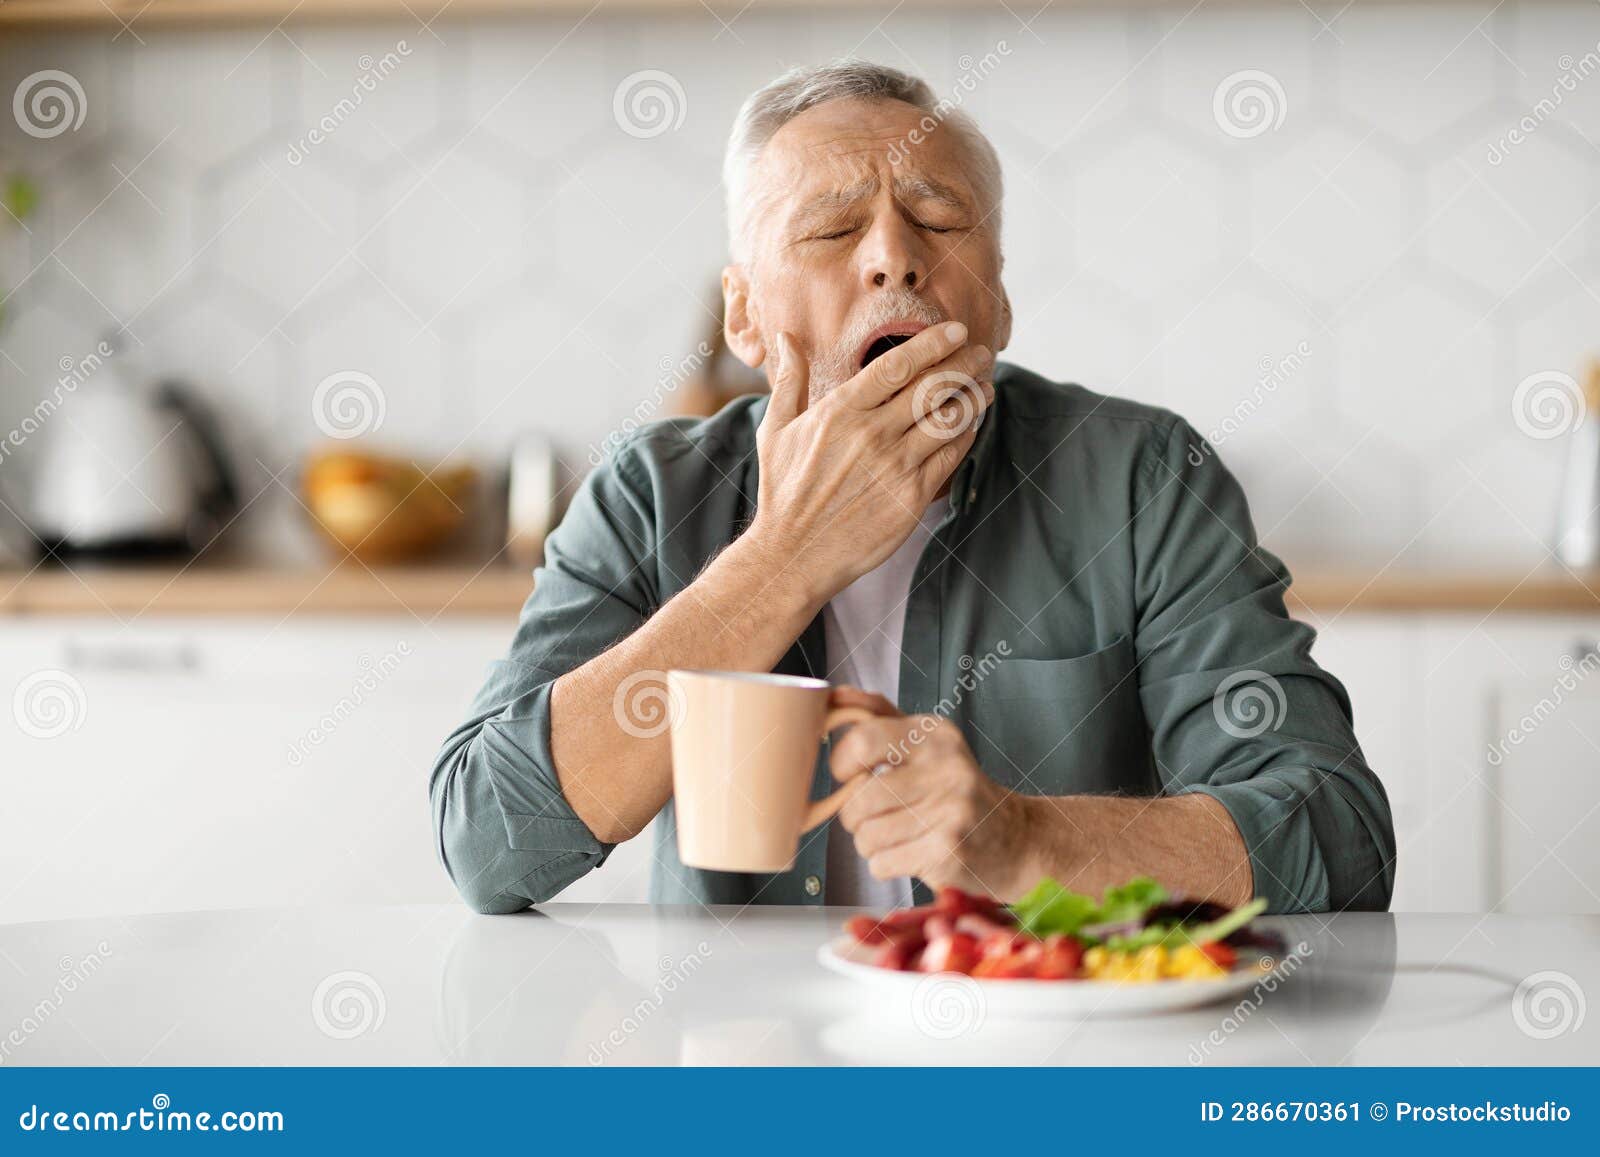 excessive daytime sleepiness. tired senior man yawning at table in kitchen